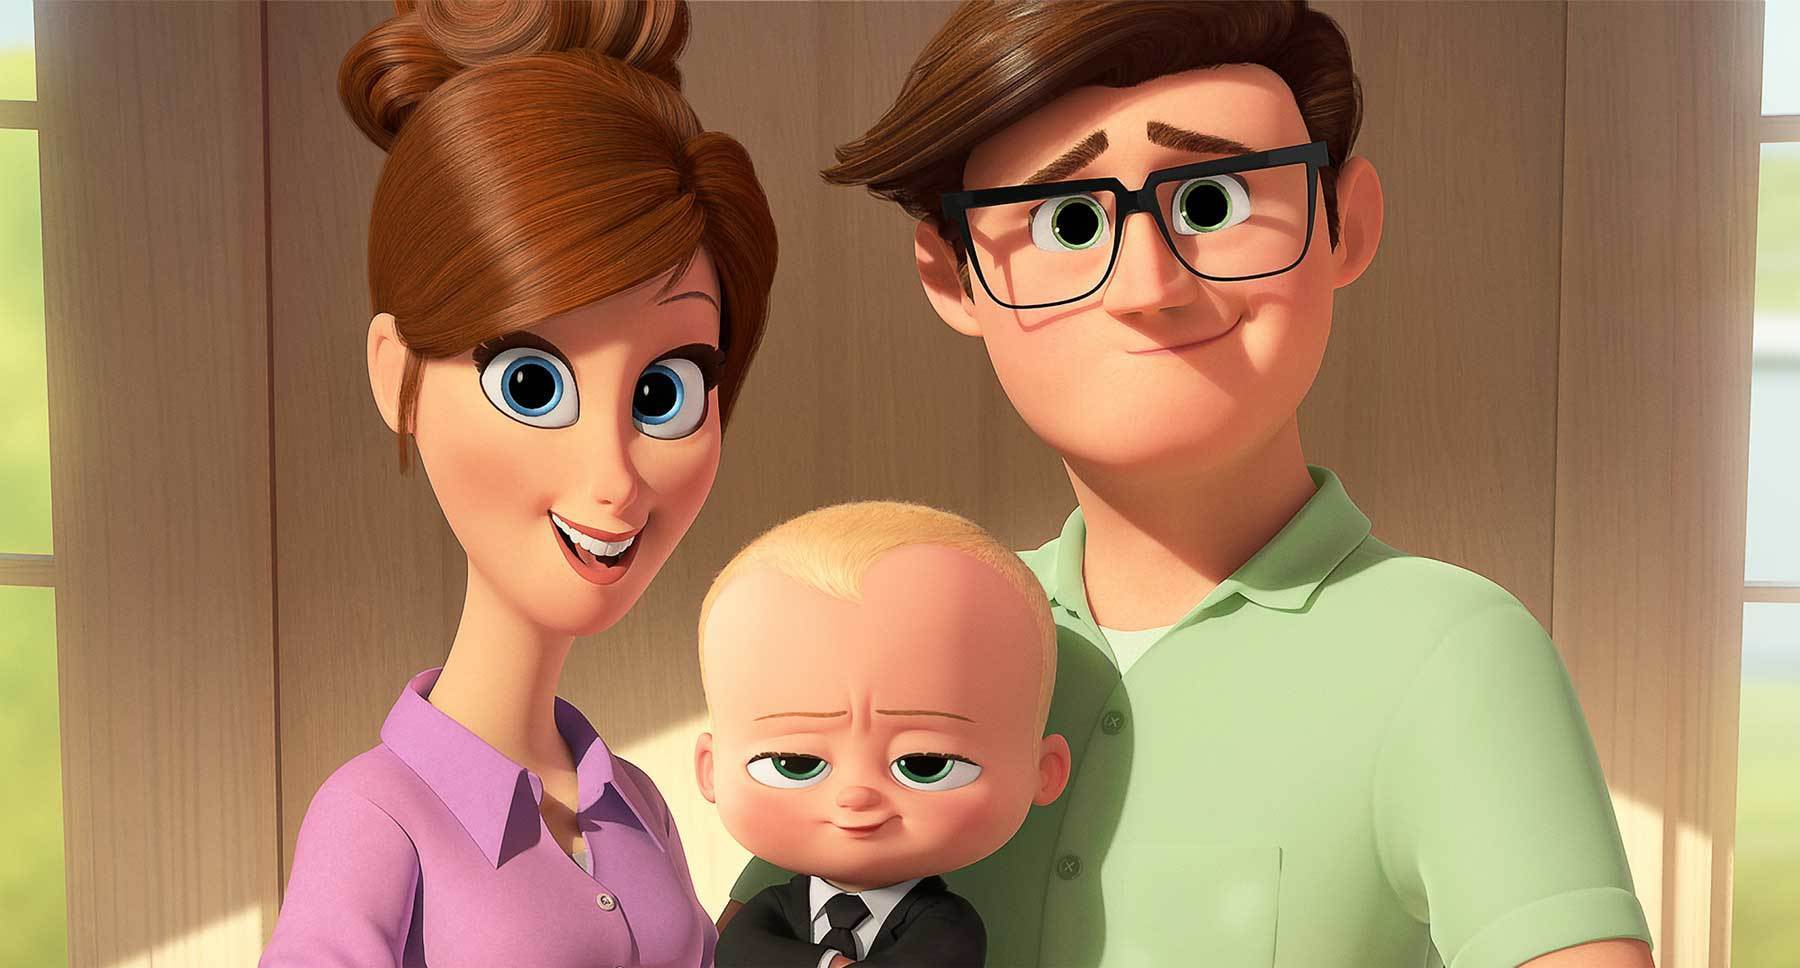 Actors Alec Baldwin, Lisa Kudrow, and Jimmy Kimmel as their characters in the animated movie "The Boss Baby"